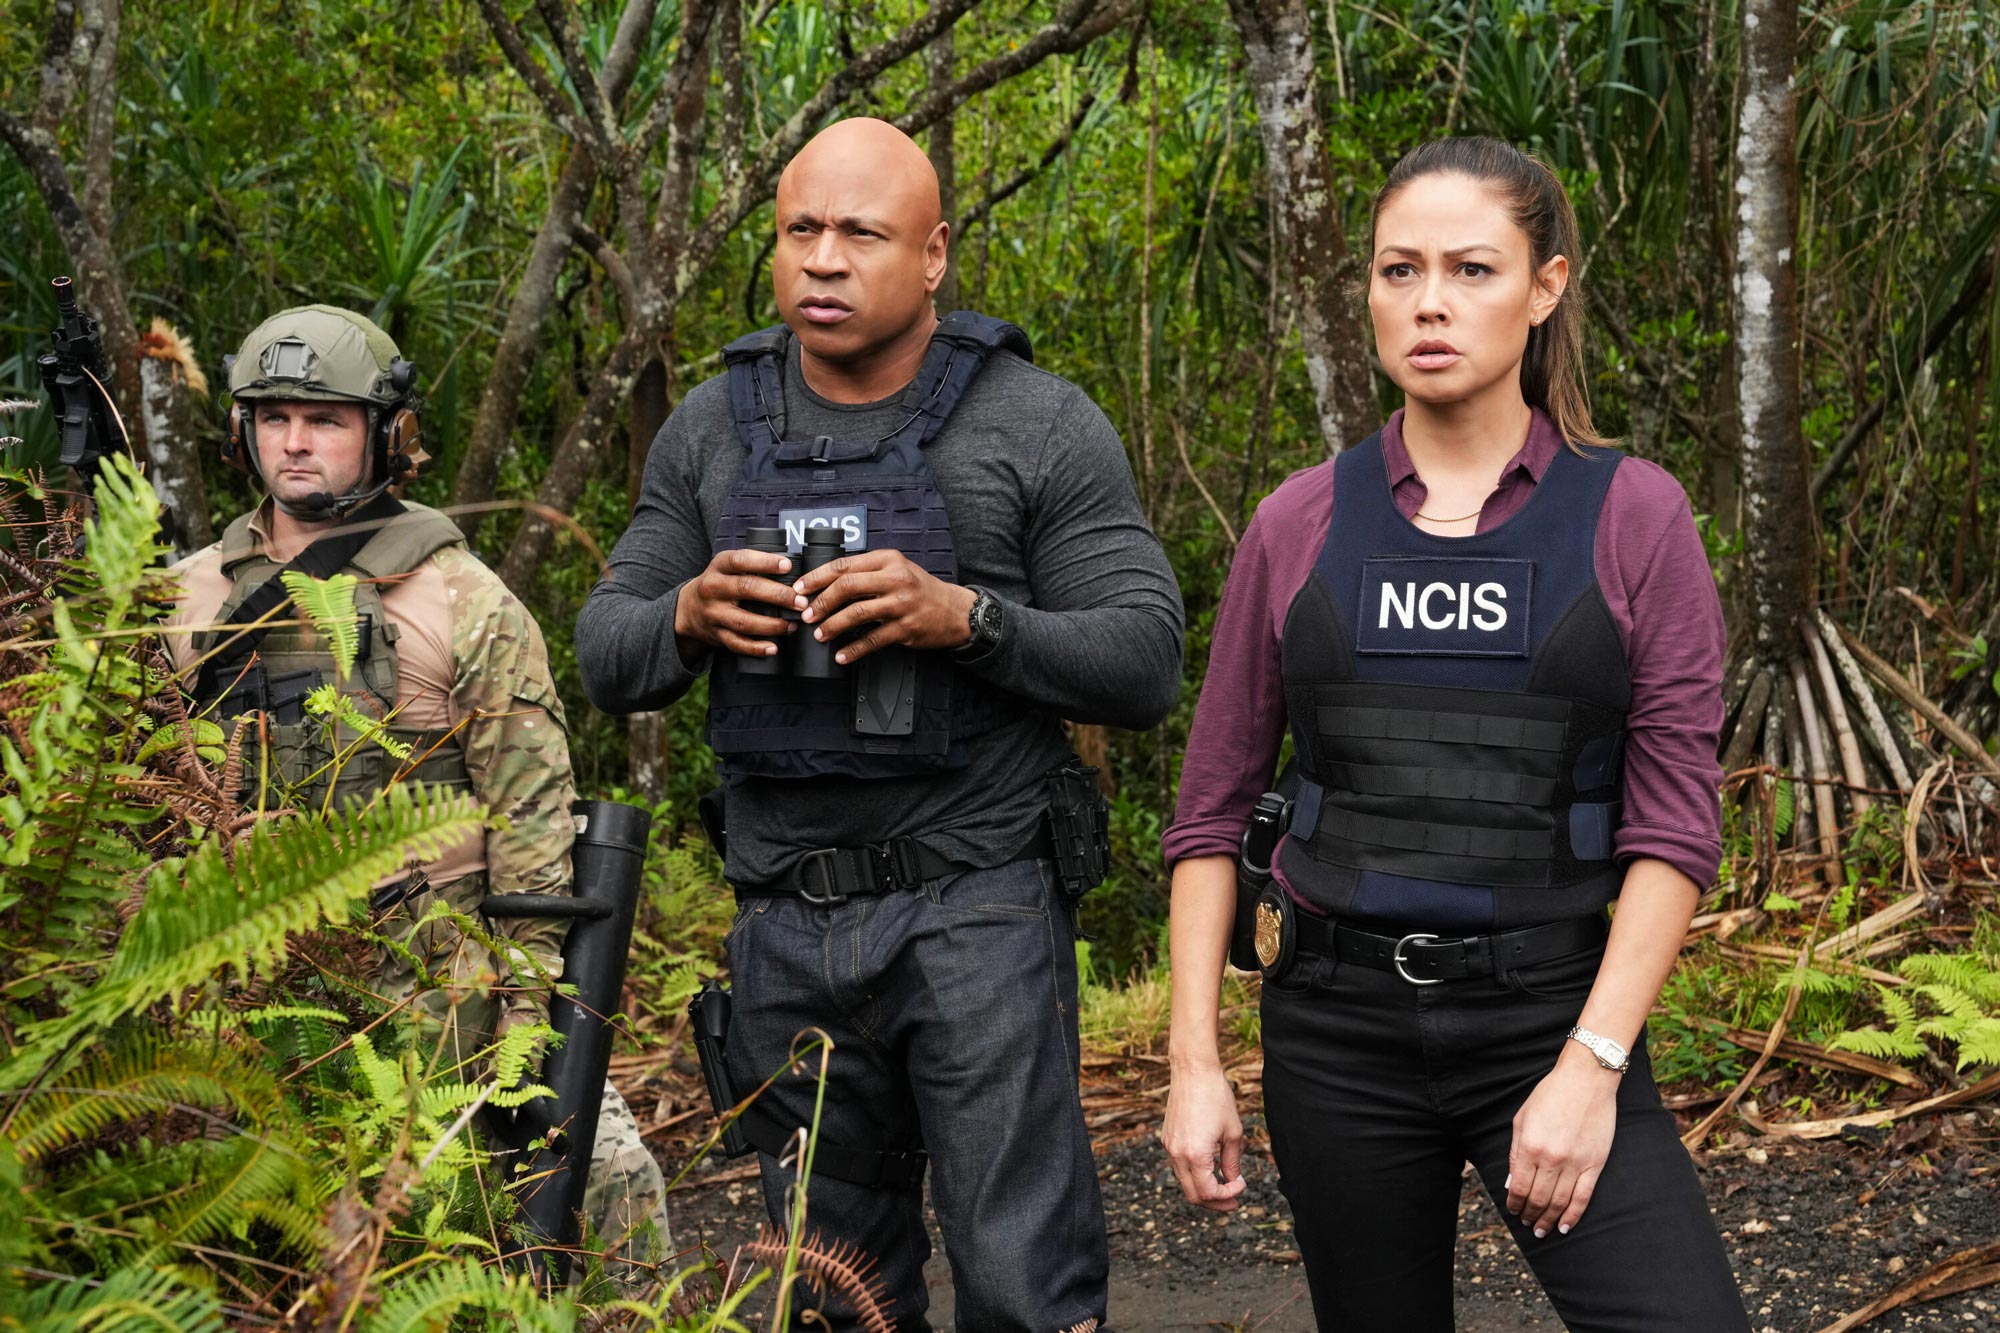 ‘NCIS: Hawai’i’ Canceled After 3 Seasons: When Will the Series Finale Air?